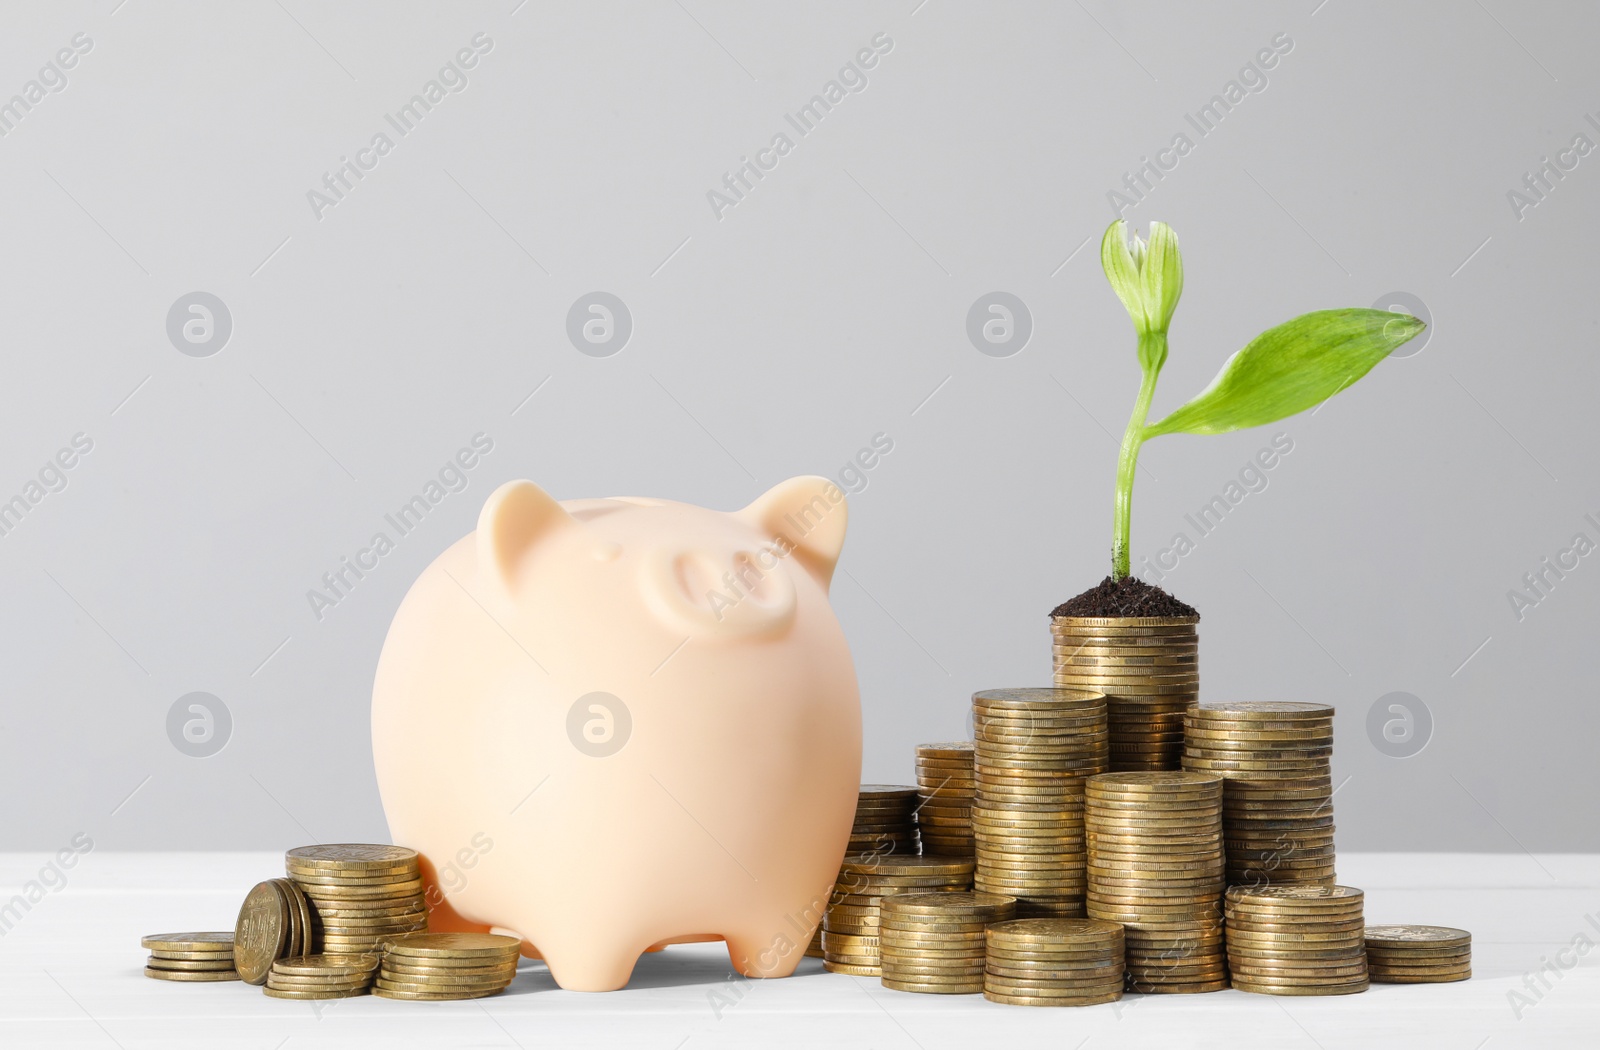 Photo of Stacks of coins with flower and piggy bank on white table against light grey background. Investment concept